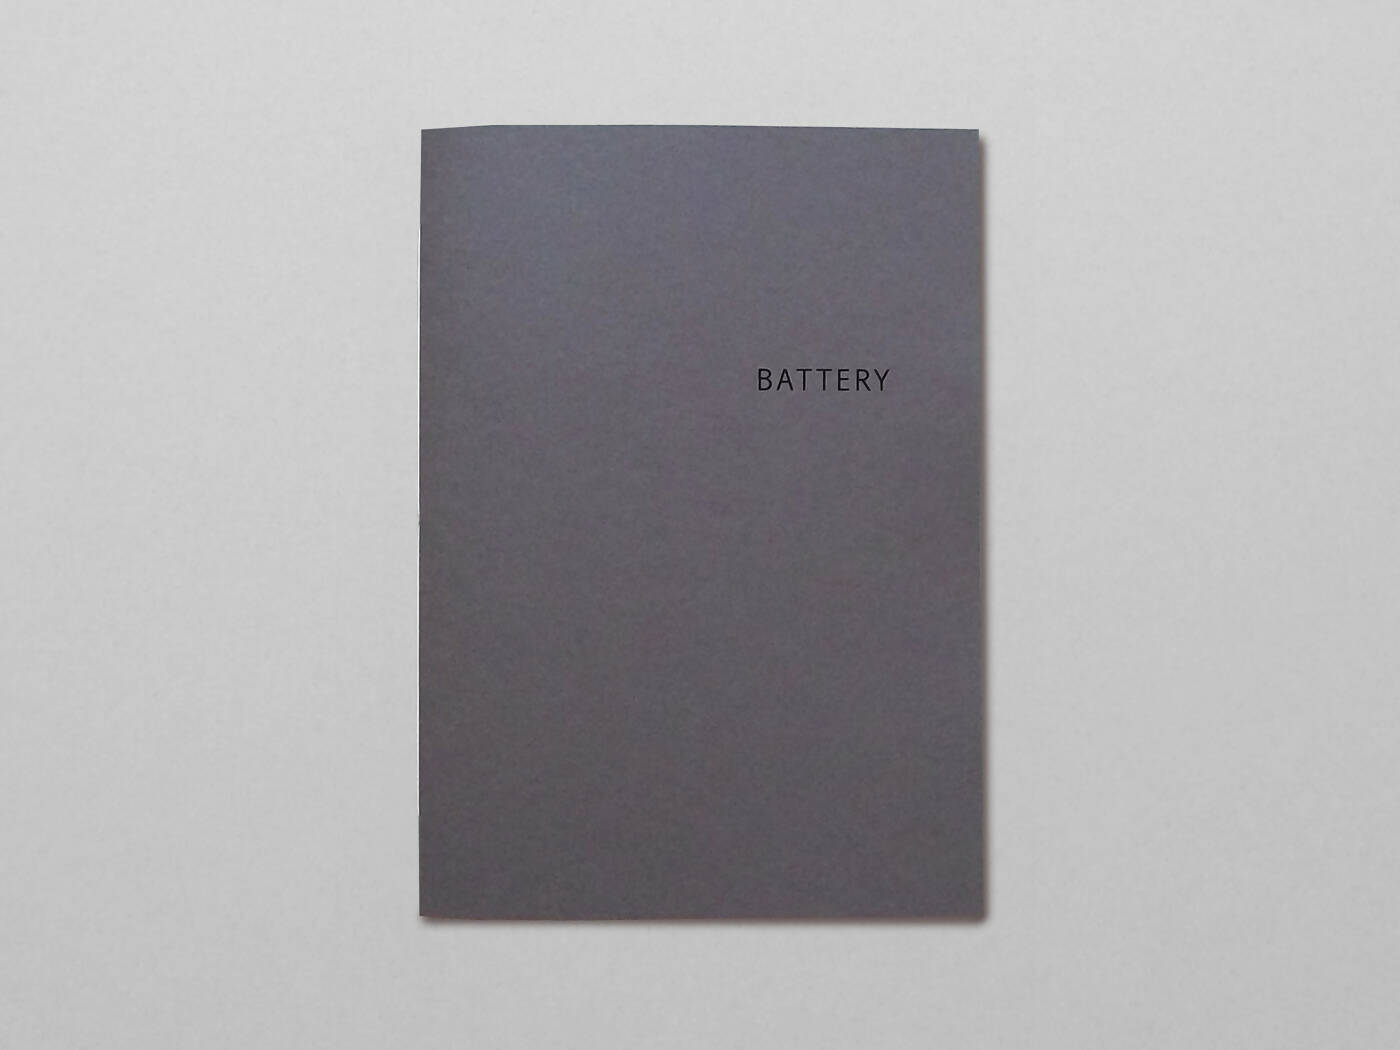 Battery by Mark Clayton